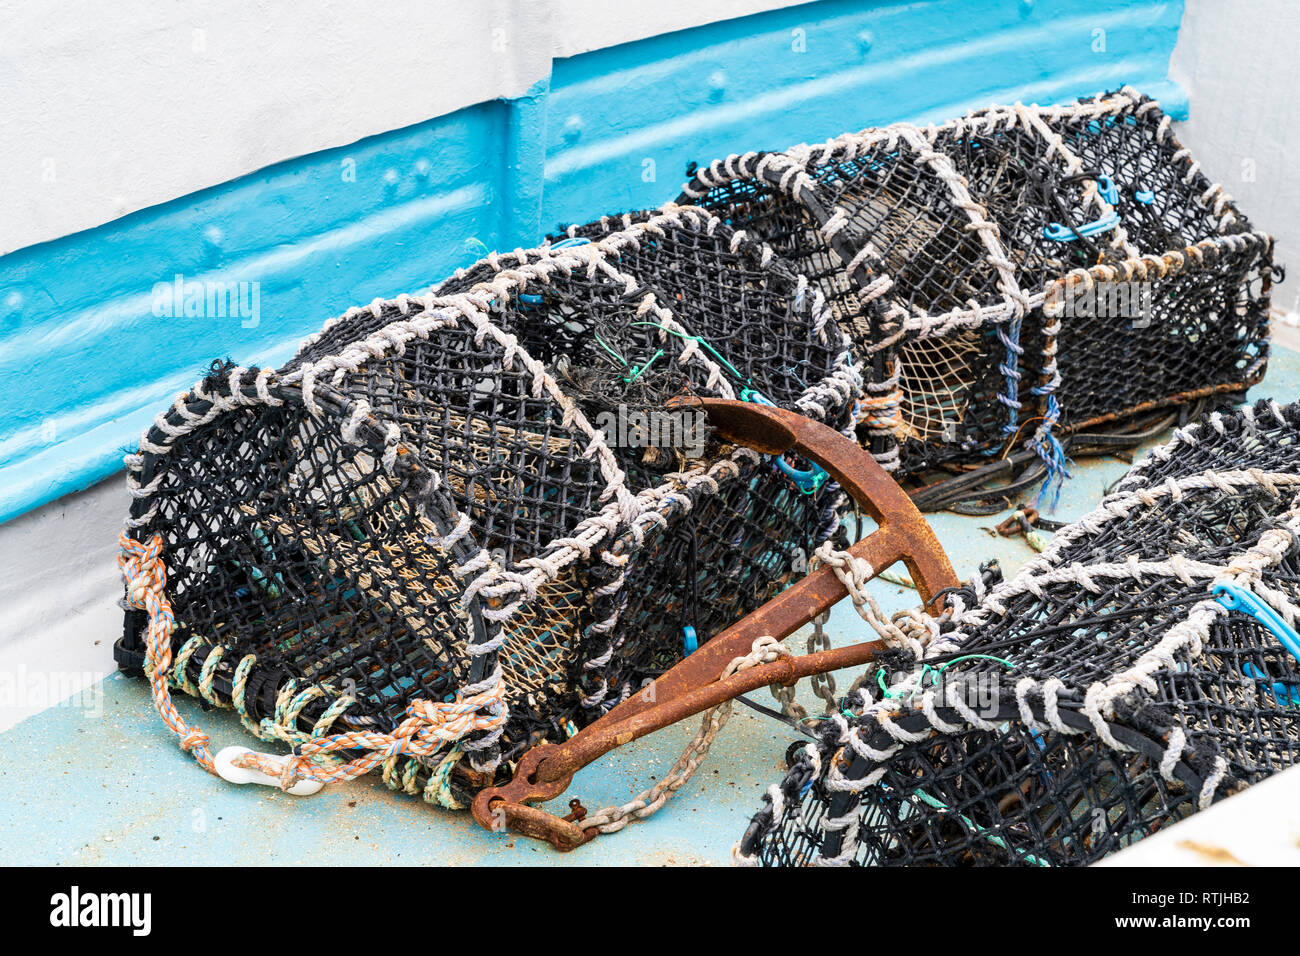 Lobster Pots, Traps and Fishing Equipment on the Back of a